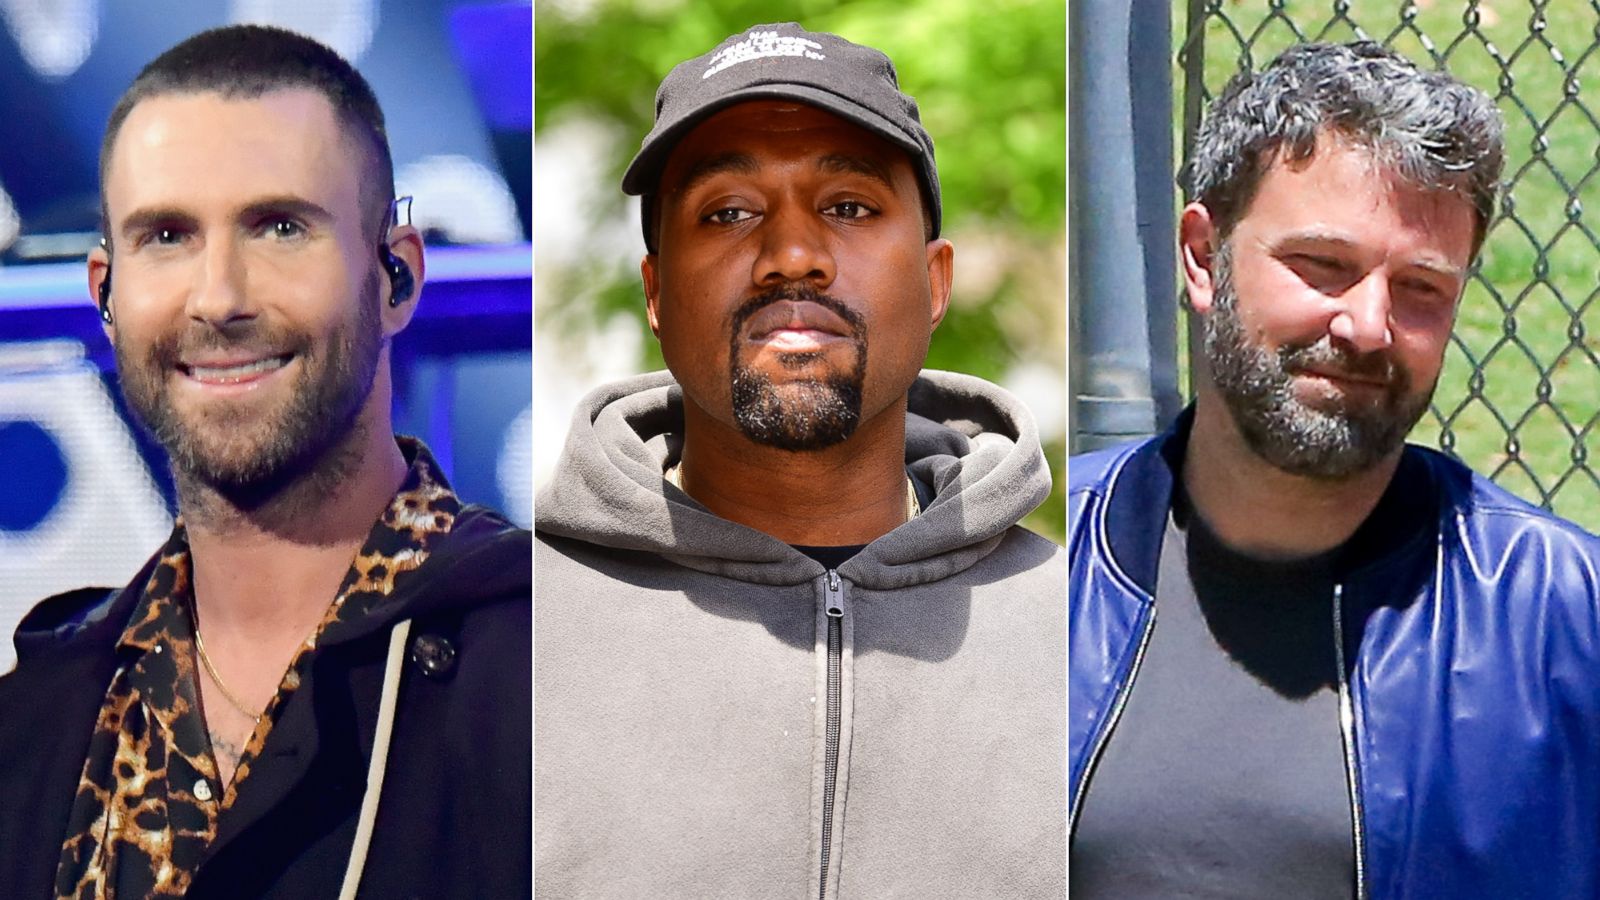 PHOTO: Adam Levine is pictured in Inglewood, Calif., March 11, 2018, Kanye West in New York on June 15, 2018 and Ben Affleck in Los Angeles, June 2, 2018.